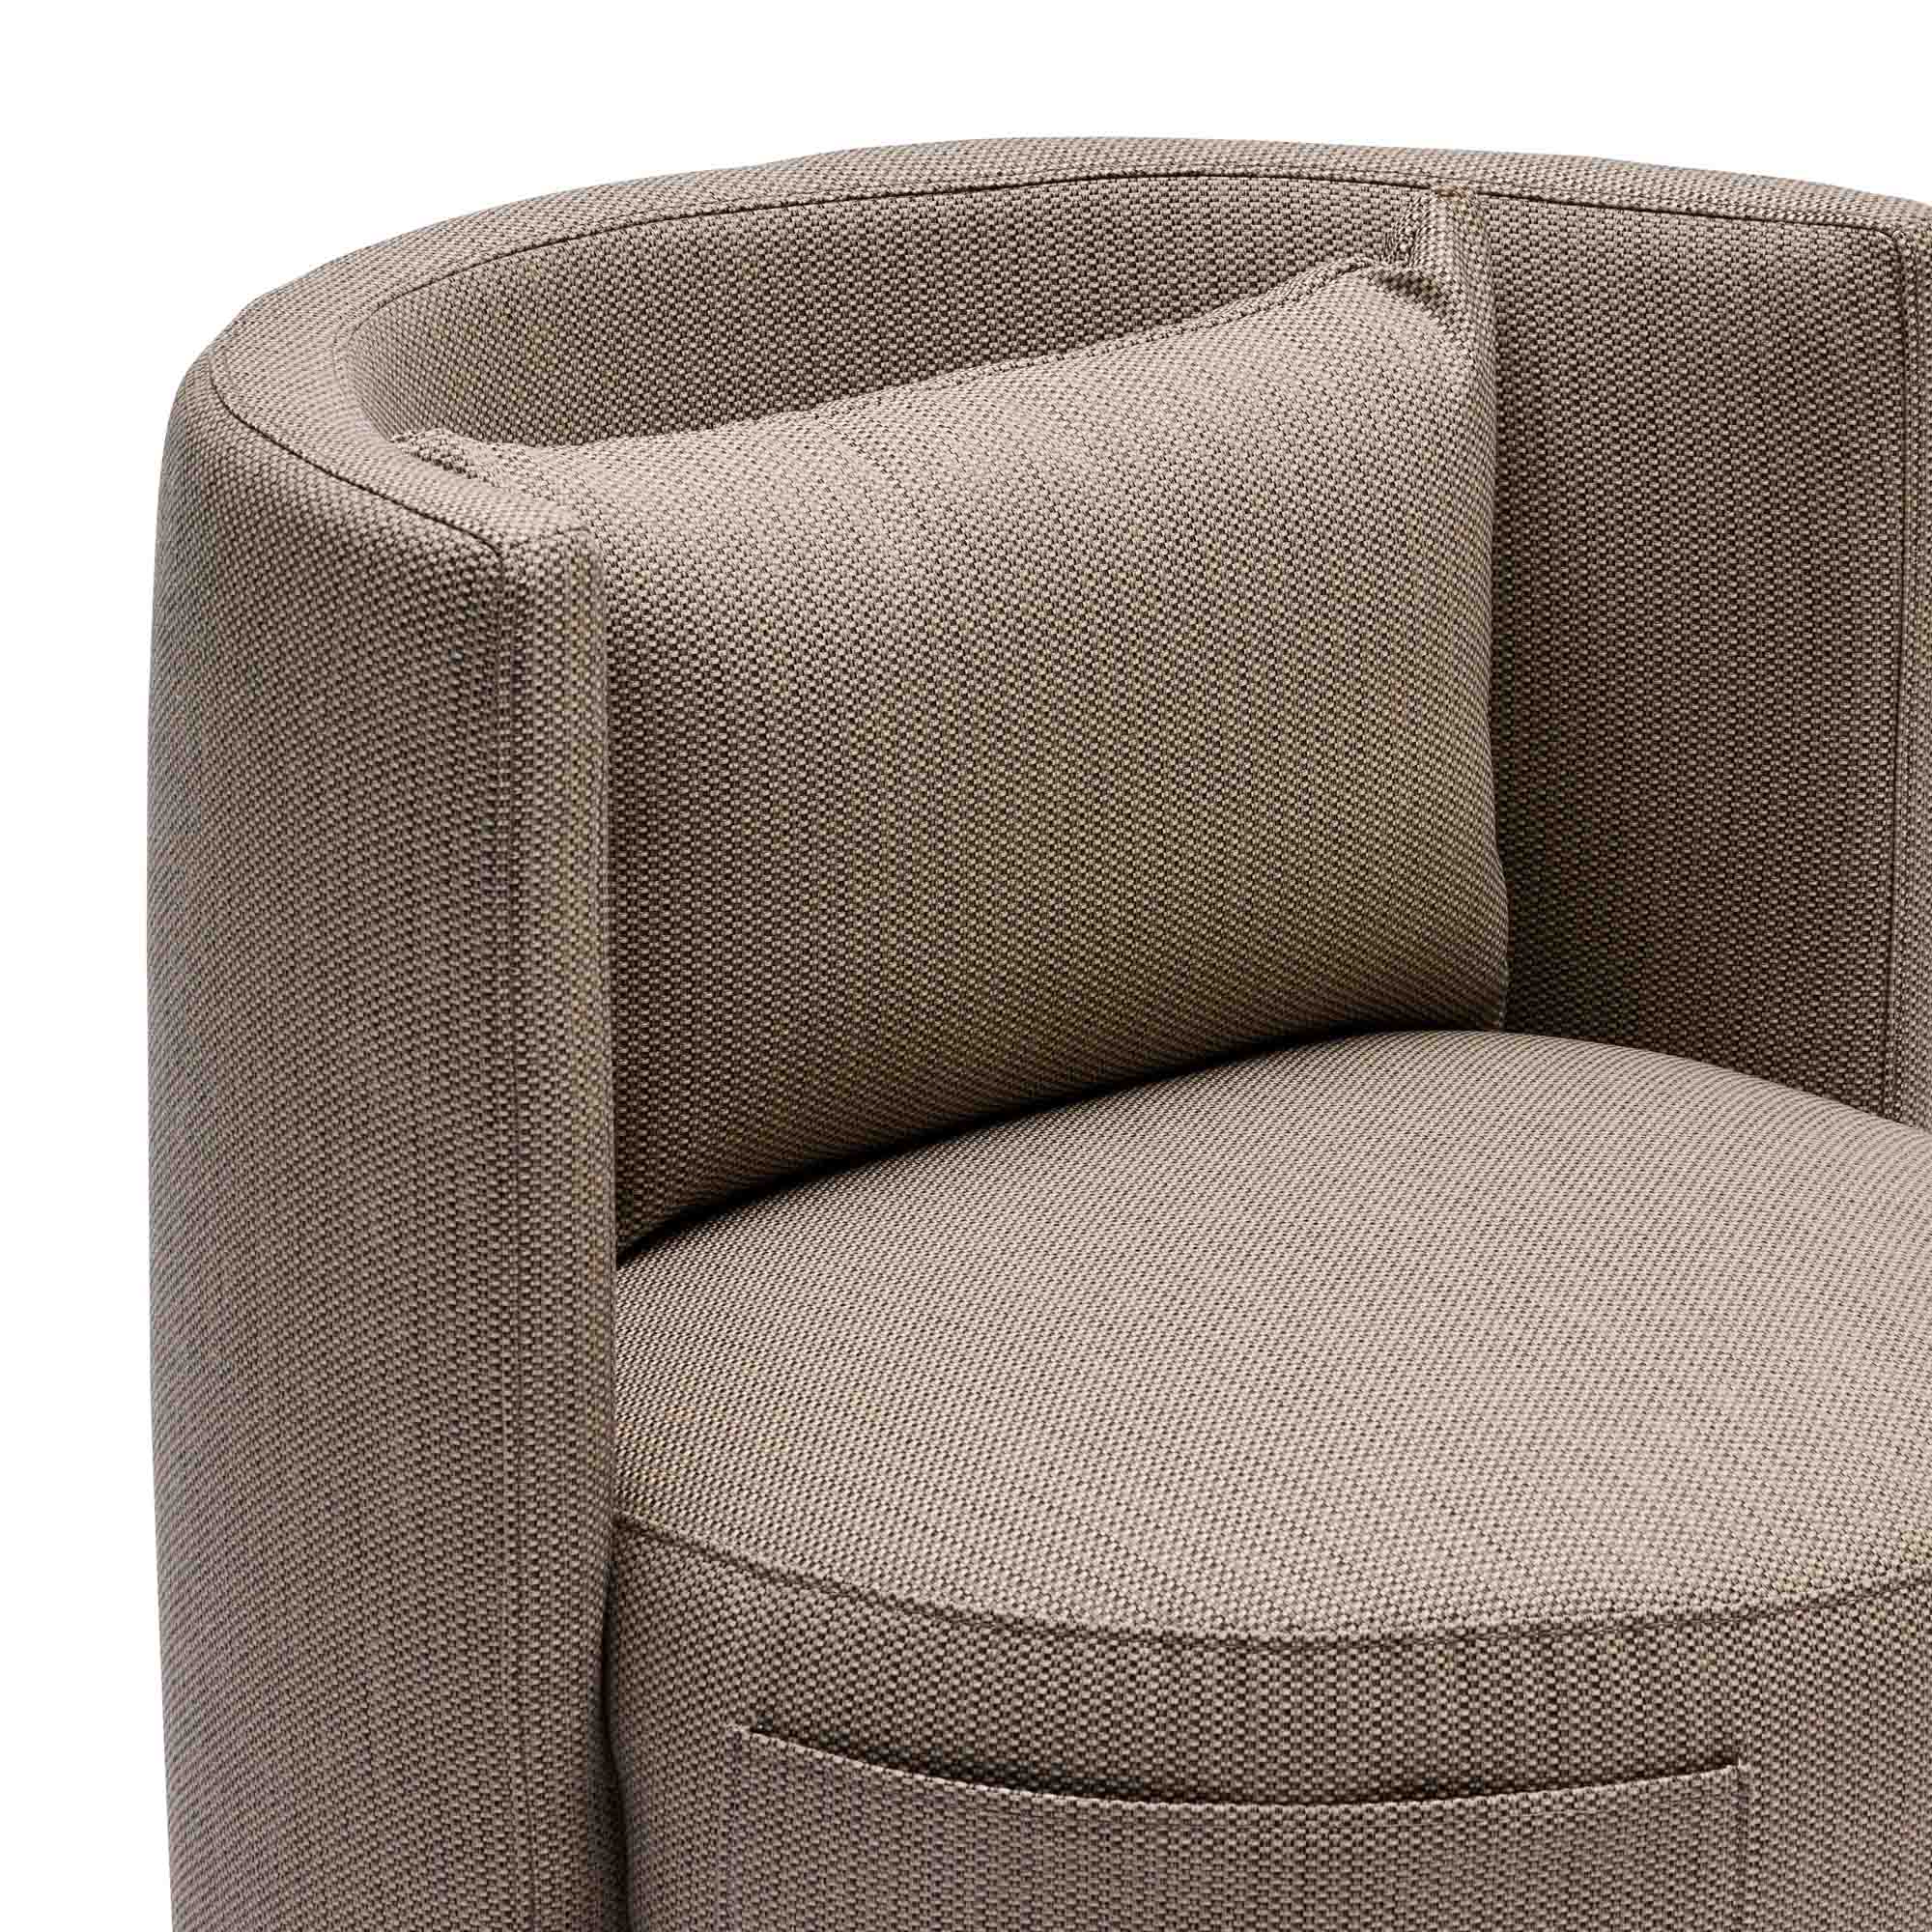 Palma Swivel Outdoor Chair Taupe